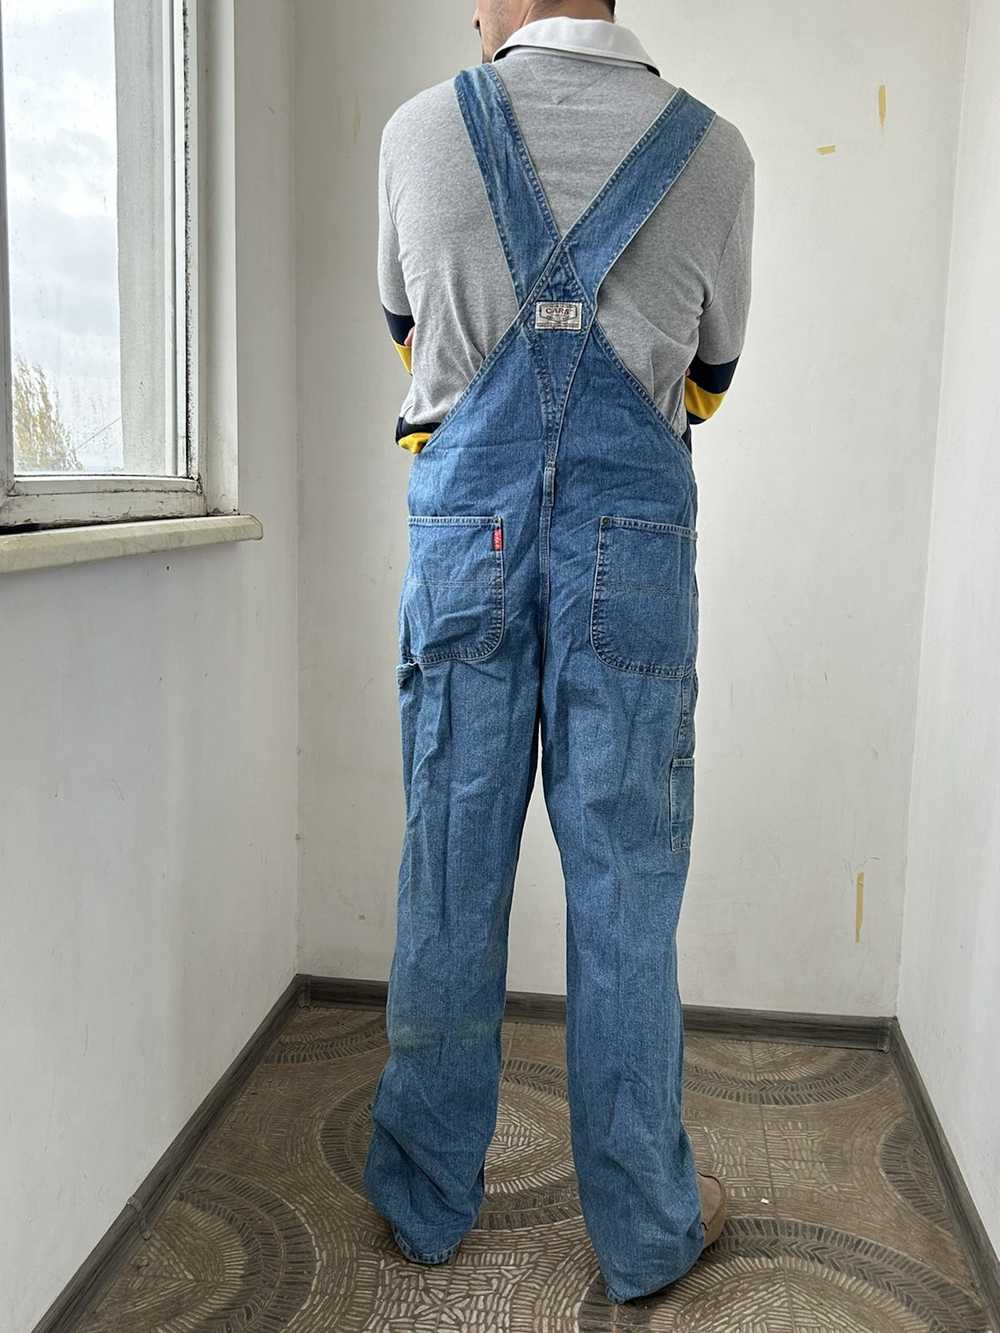 Japanese Brand × Overalls × Workers Cars overall - image 2